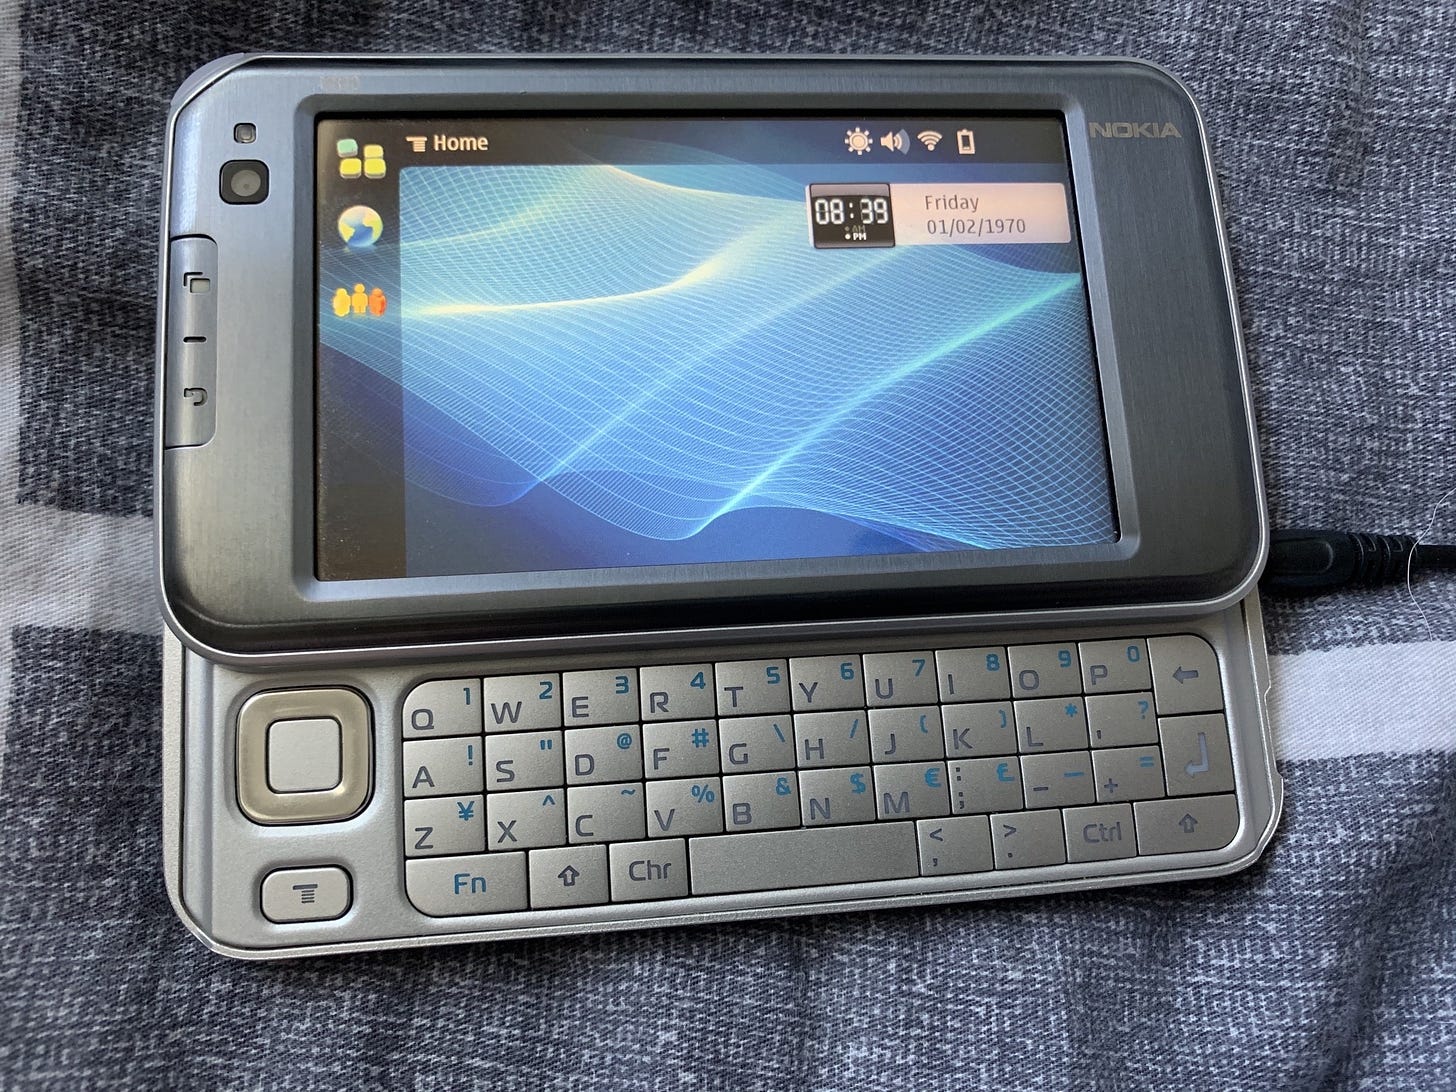 The Linux-powered Nokia N810 from 2007 -- still awesome in 2021